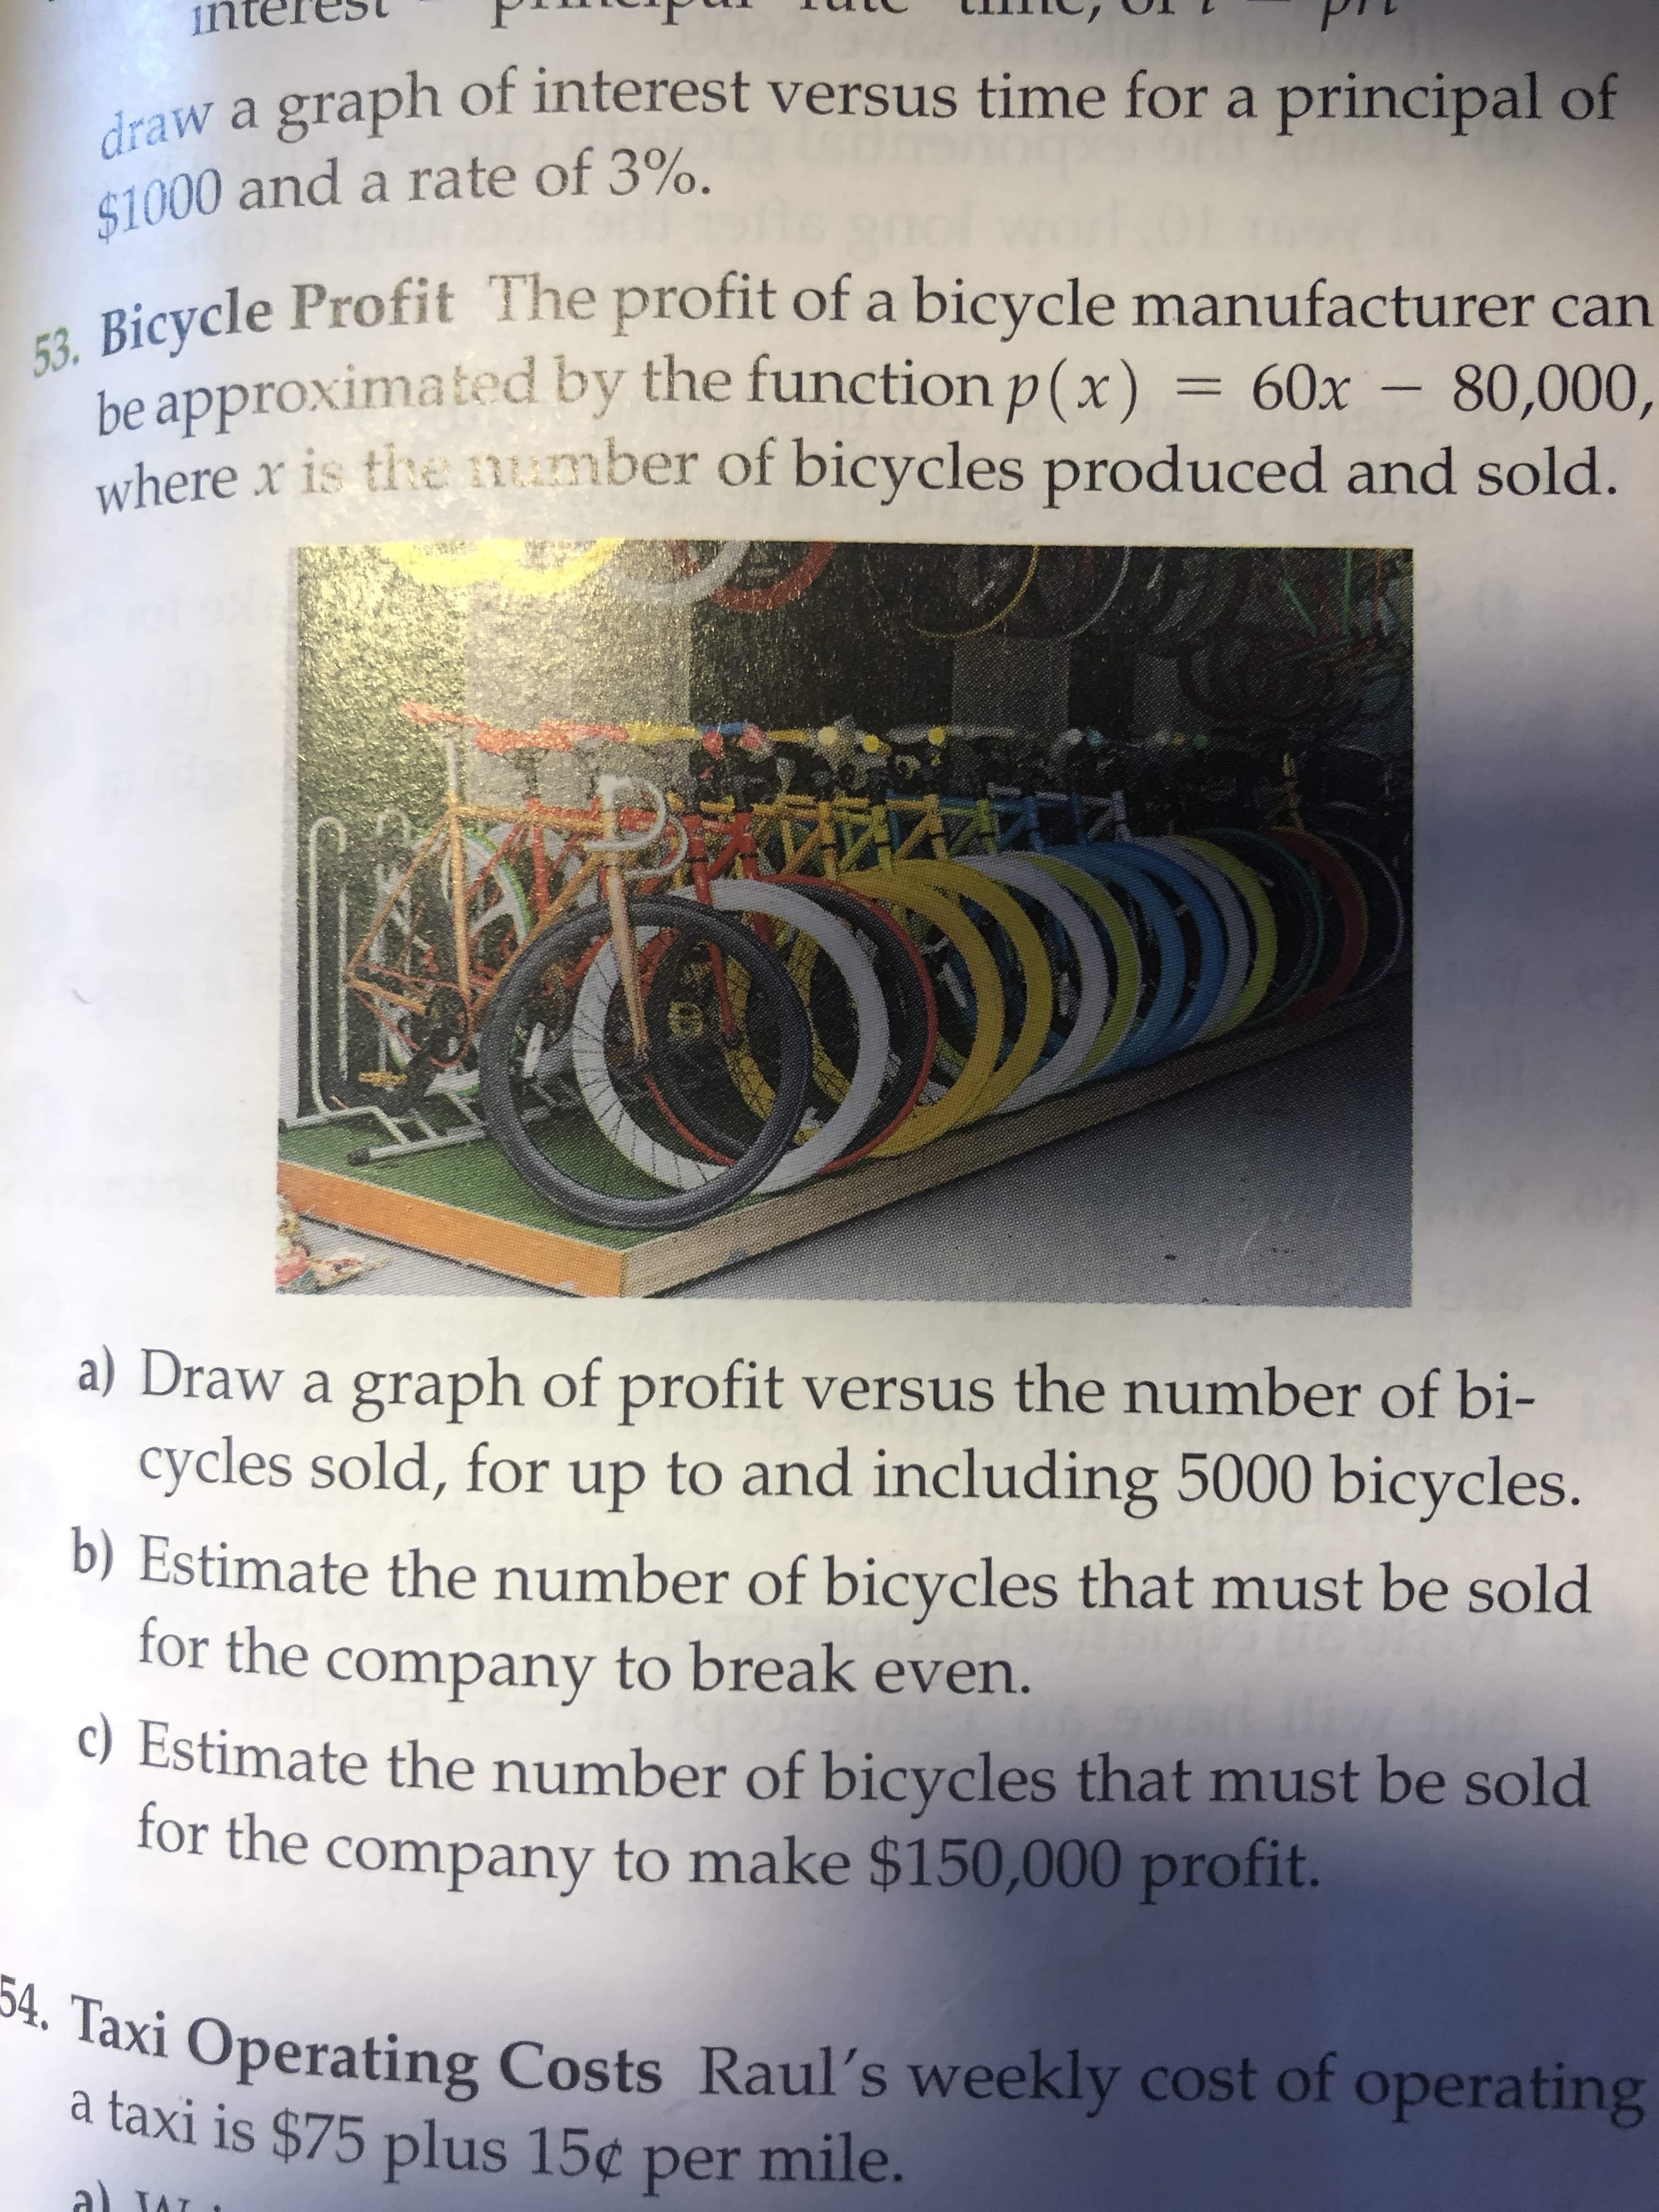 draw a graph of interest versus time for a principal of
$1000 and a rate of 3%.
53. Bicycle Profit The profit of a bicycle manufacturer can
be approximated by the function p(x)
where x is tie umber of bicycles produced and sold.
= 60x – 80,000,
%3D
a) Draw a graph of profit versus the number of bi-
cycles sold, for up to and including 5000 bicycles.
b) Estimate the number of bicycles that must be sold
for the company to break even.
C) Estimate the number of bicycles that must be sold
for the company to make $150,000 profit.
** Taxi Operating Costs Raul's weekly cost of operating
a taxi is $75 plus 15¢ per mile.
a) JA
